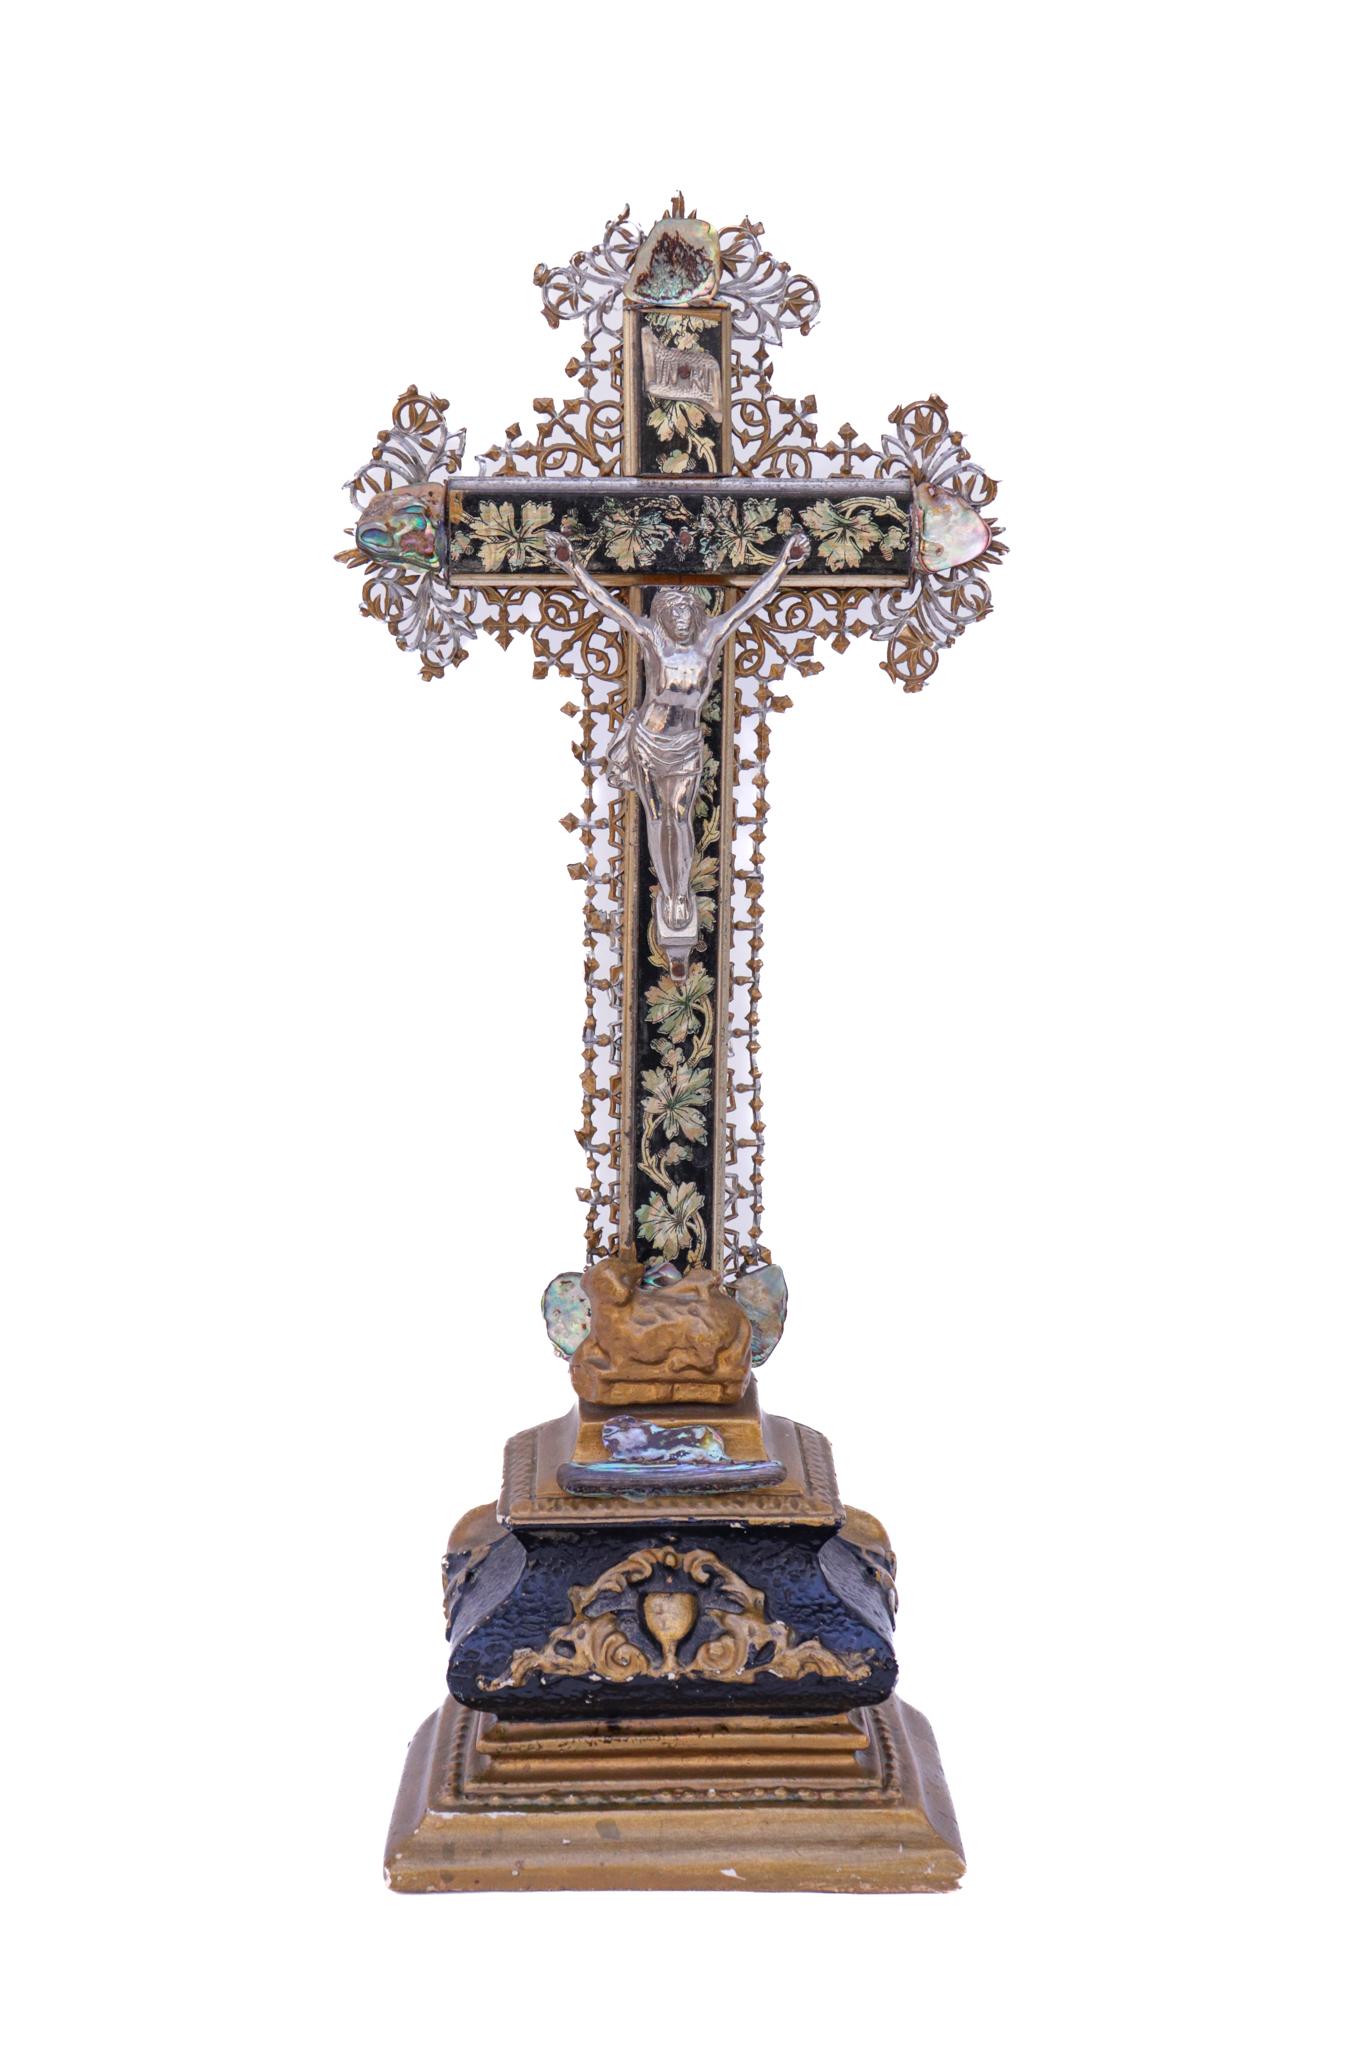 19th century French crucifix with metal filigree and a silver figure of Christ with abalone shells.

The piece has been hand-carved and painted and has the original silver figure of Christ. The abalone shells have been applied by Jean O'Reilly